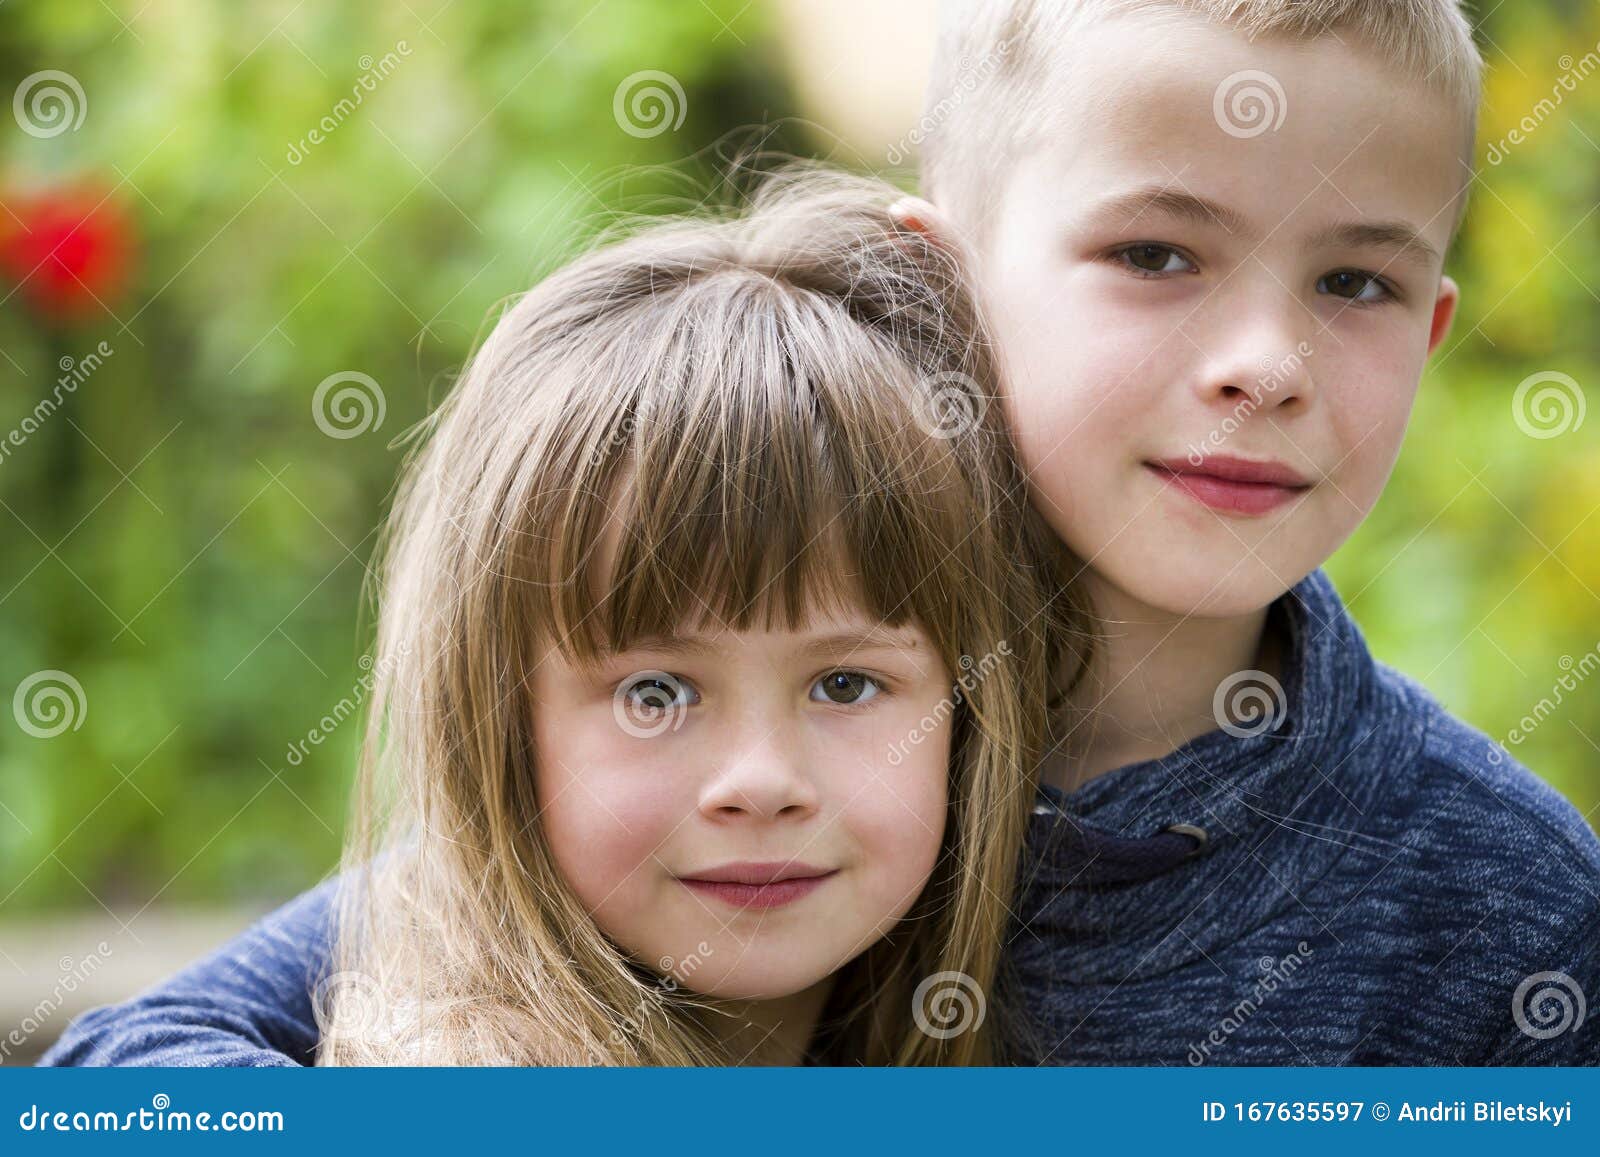 Two Cute Fair-haired Children Siblings, Young Boy Brother Embracing